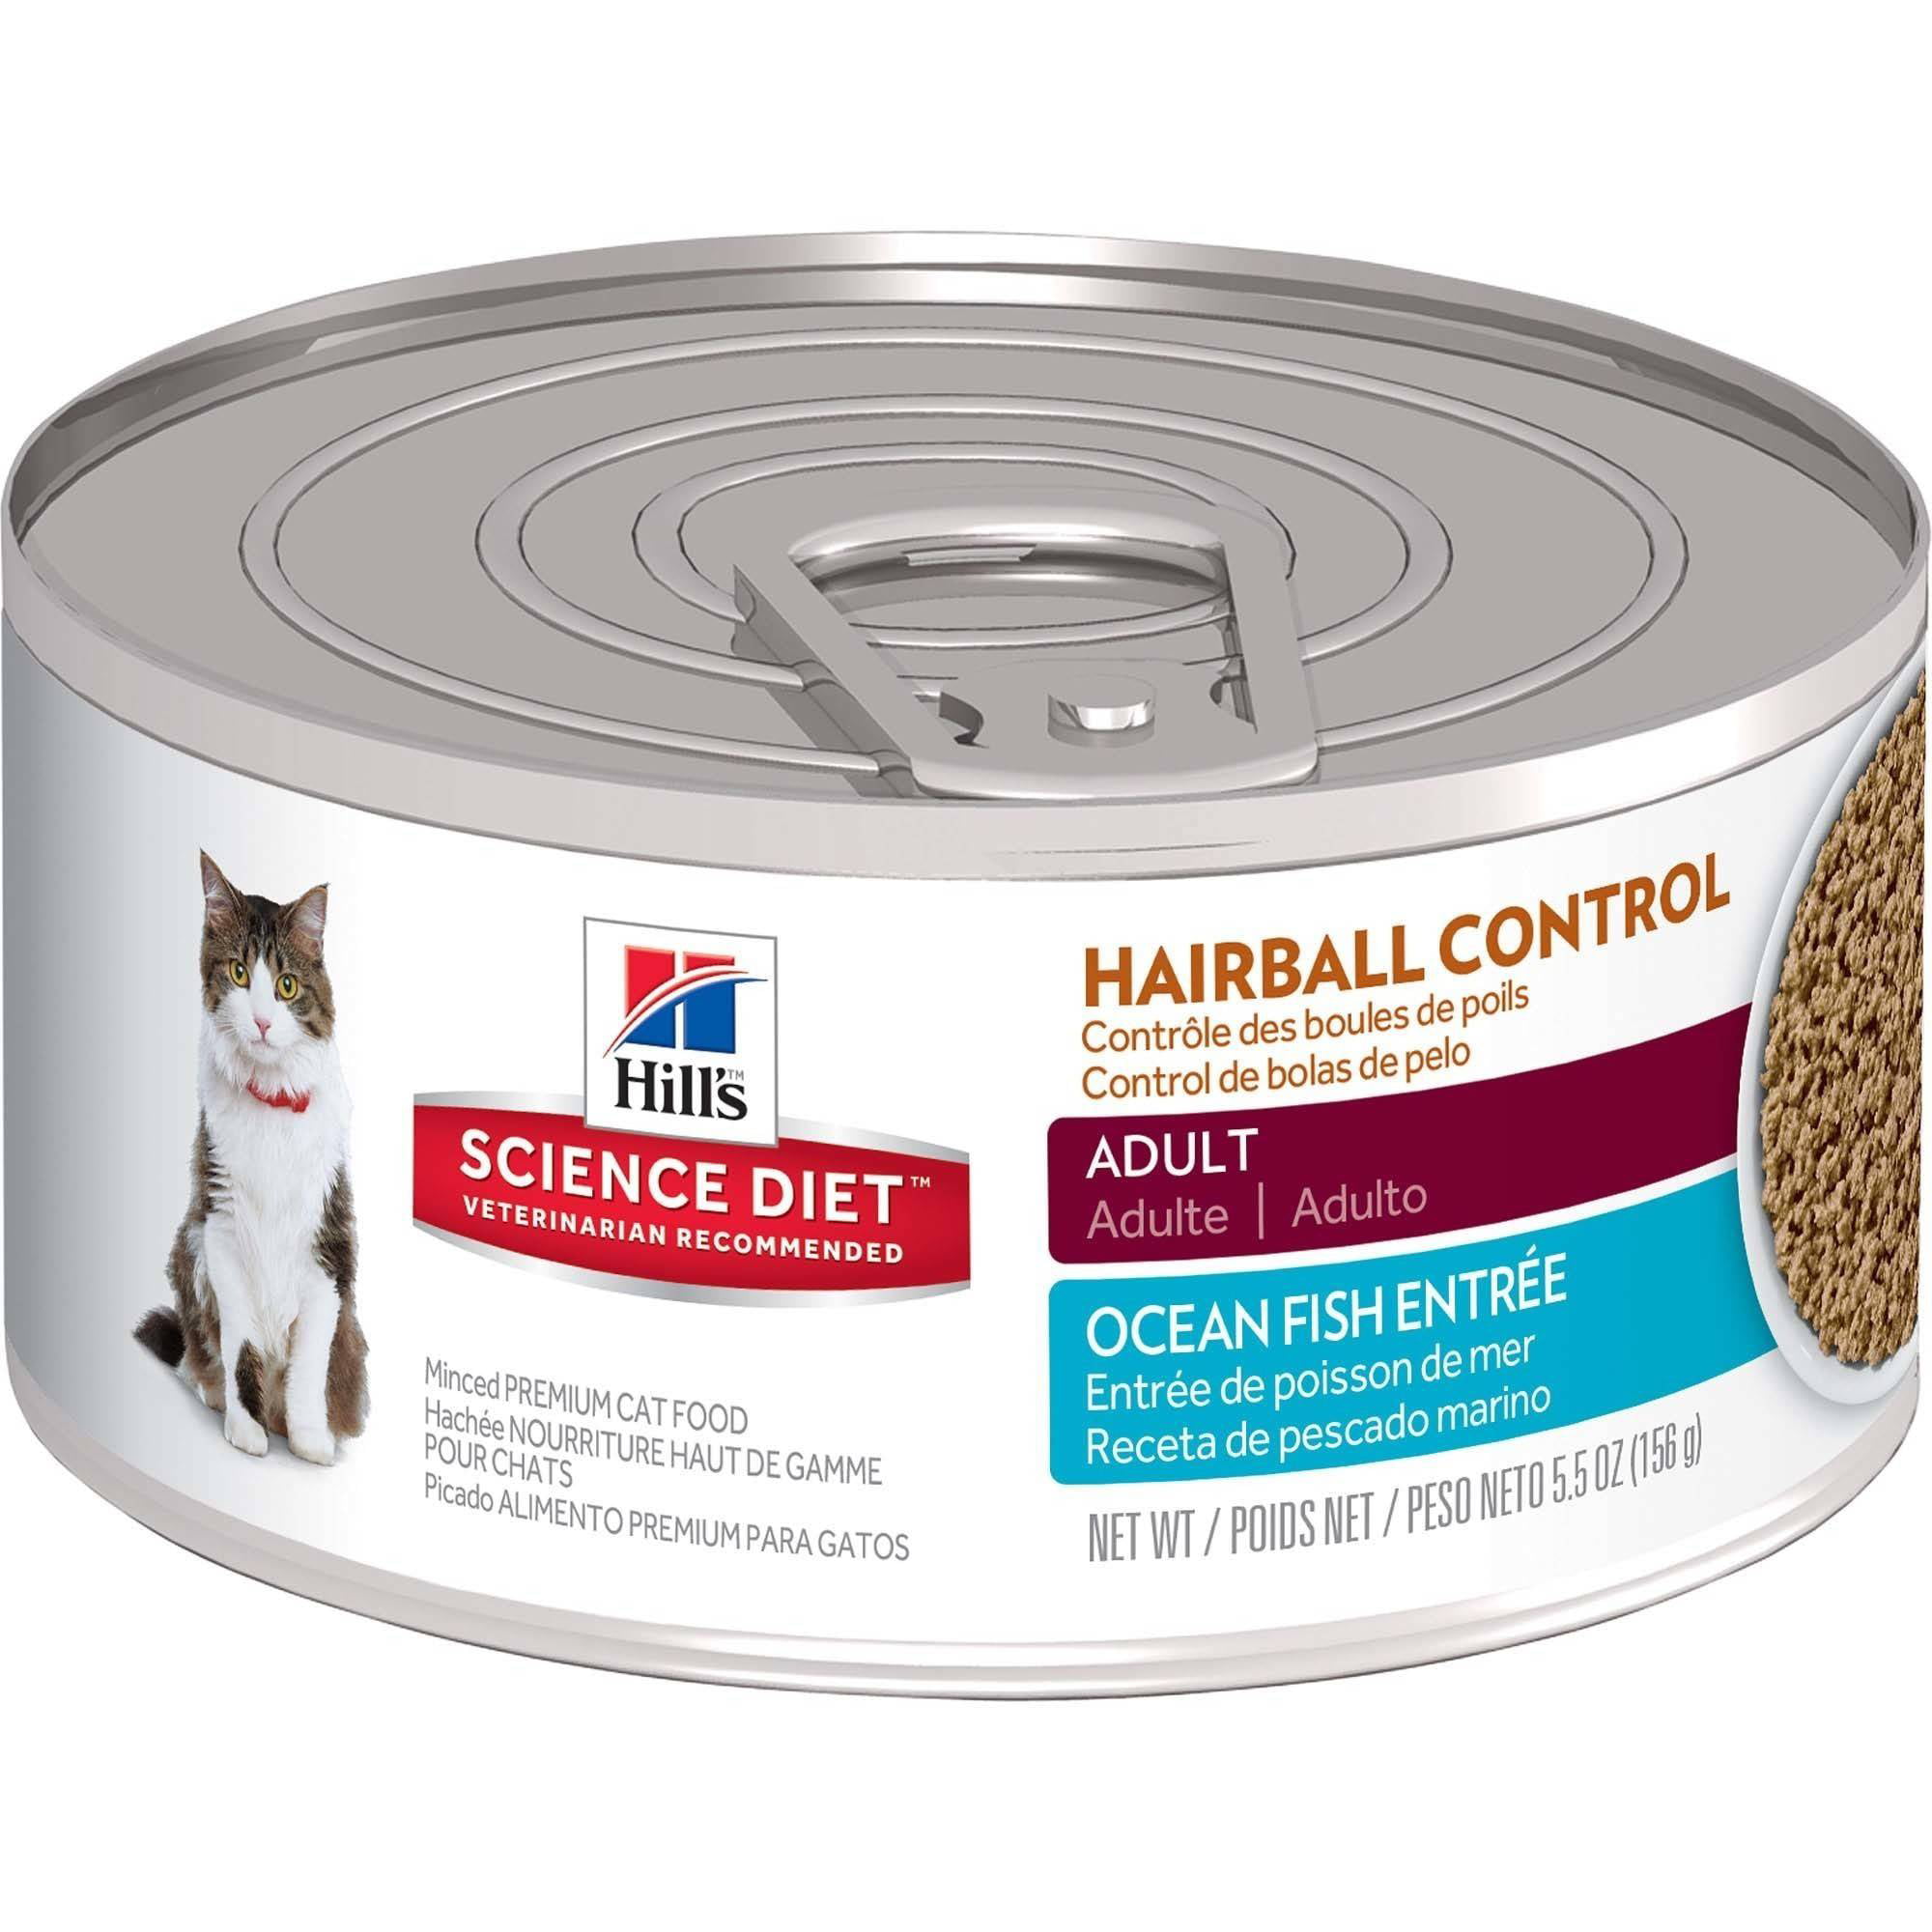 Hill's Science Diet Adult Hairball Control Ocean Fish EntrÃ©e Canned